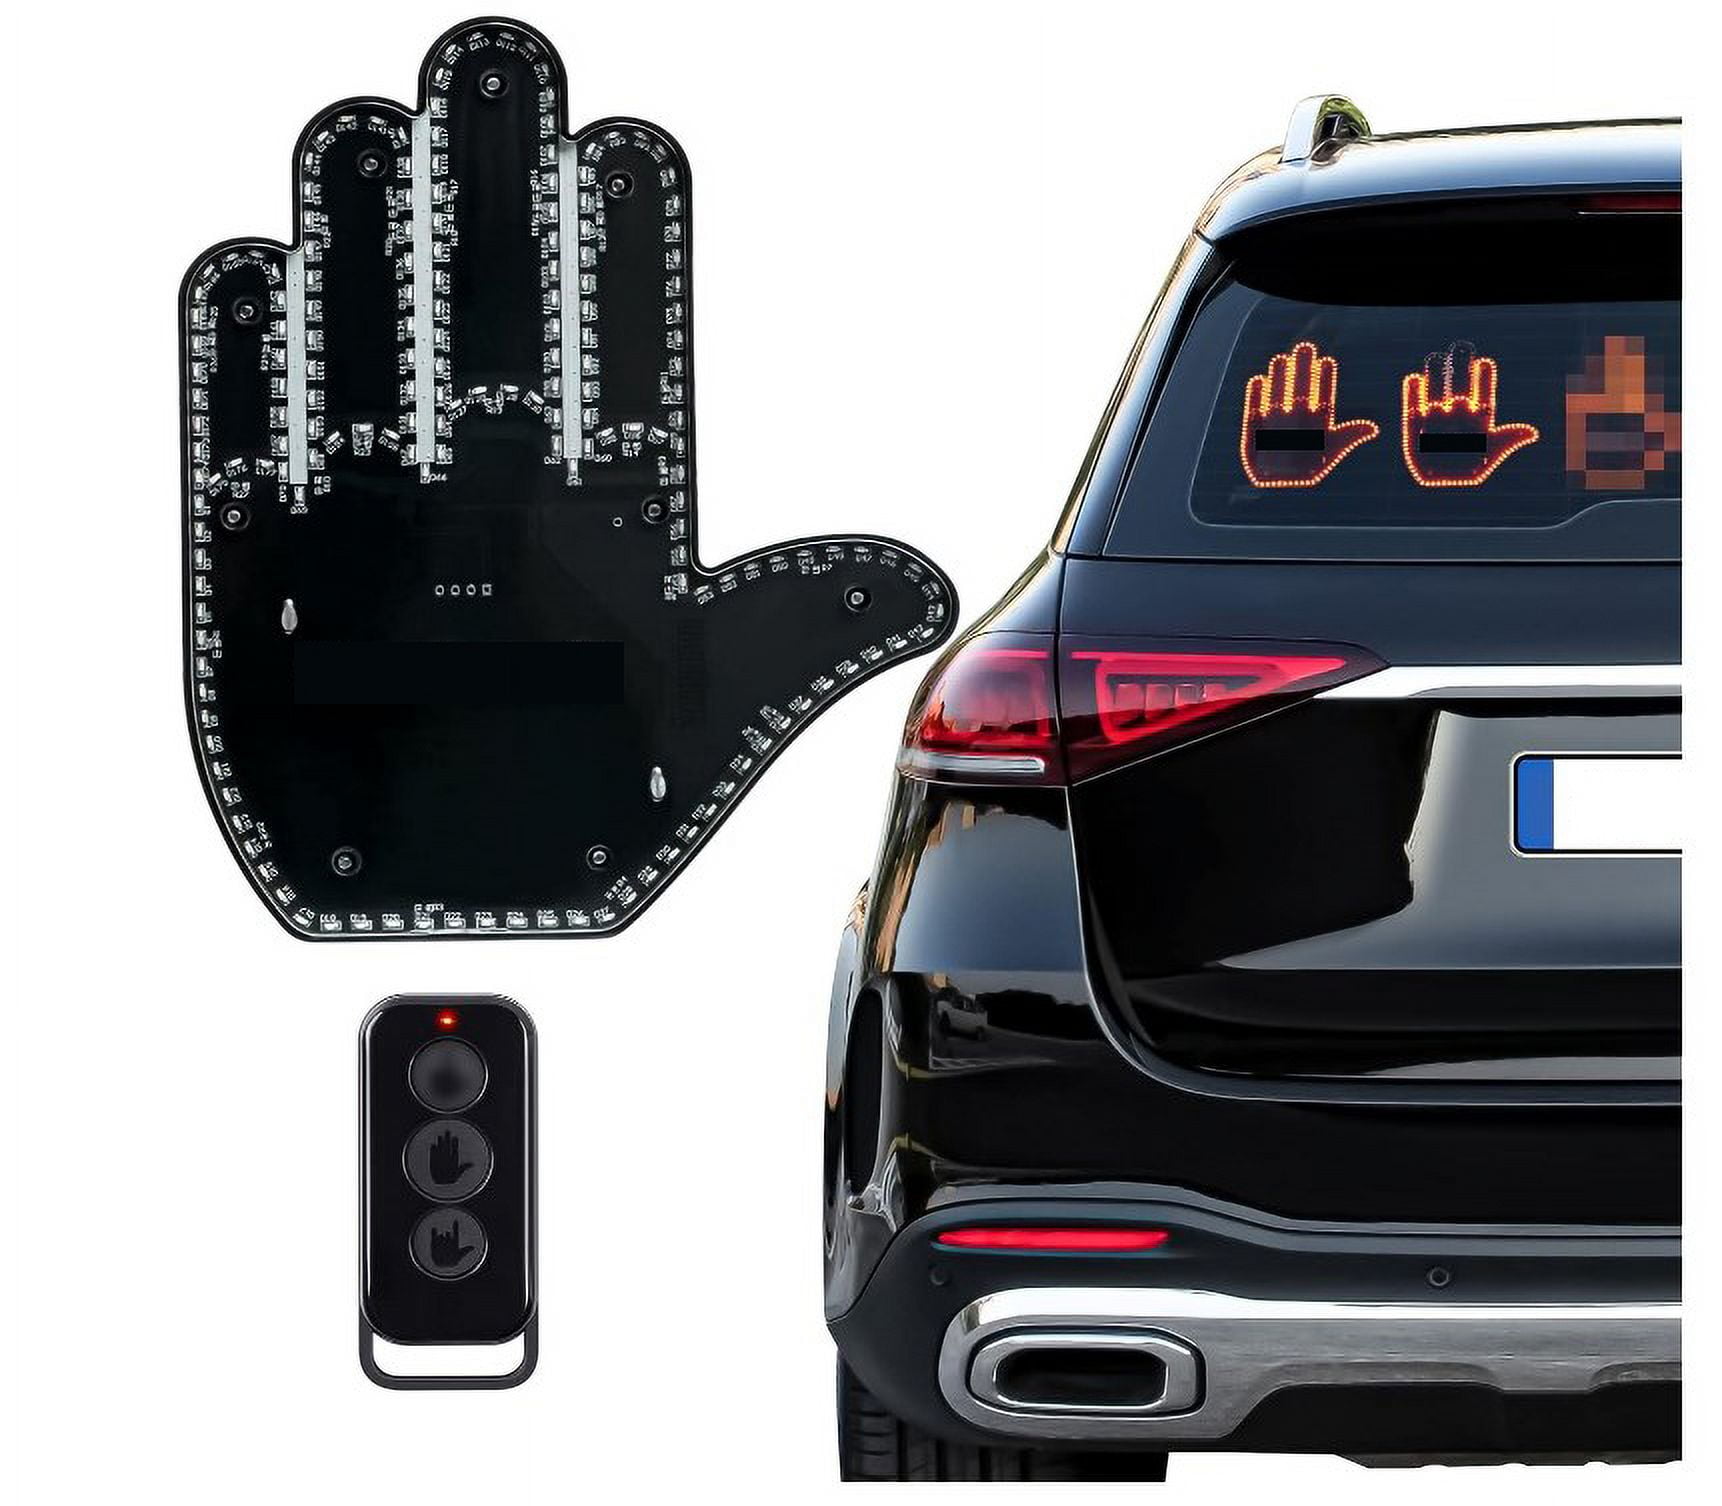  Flik Peacemaker - Thumbs Up & Down Light - Hottest Gifted Car  Accessories, Truck Accessories, Car Gadgets & Road Rage Signs for Men,  Women, & Teens - Funny Back Window : Electronics